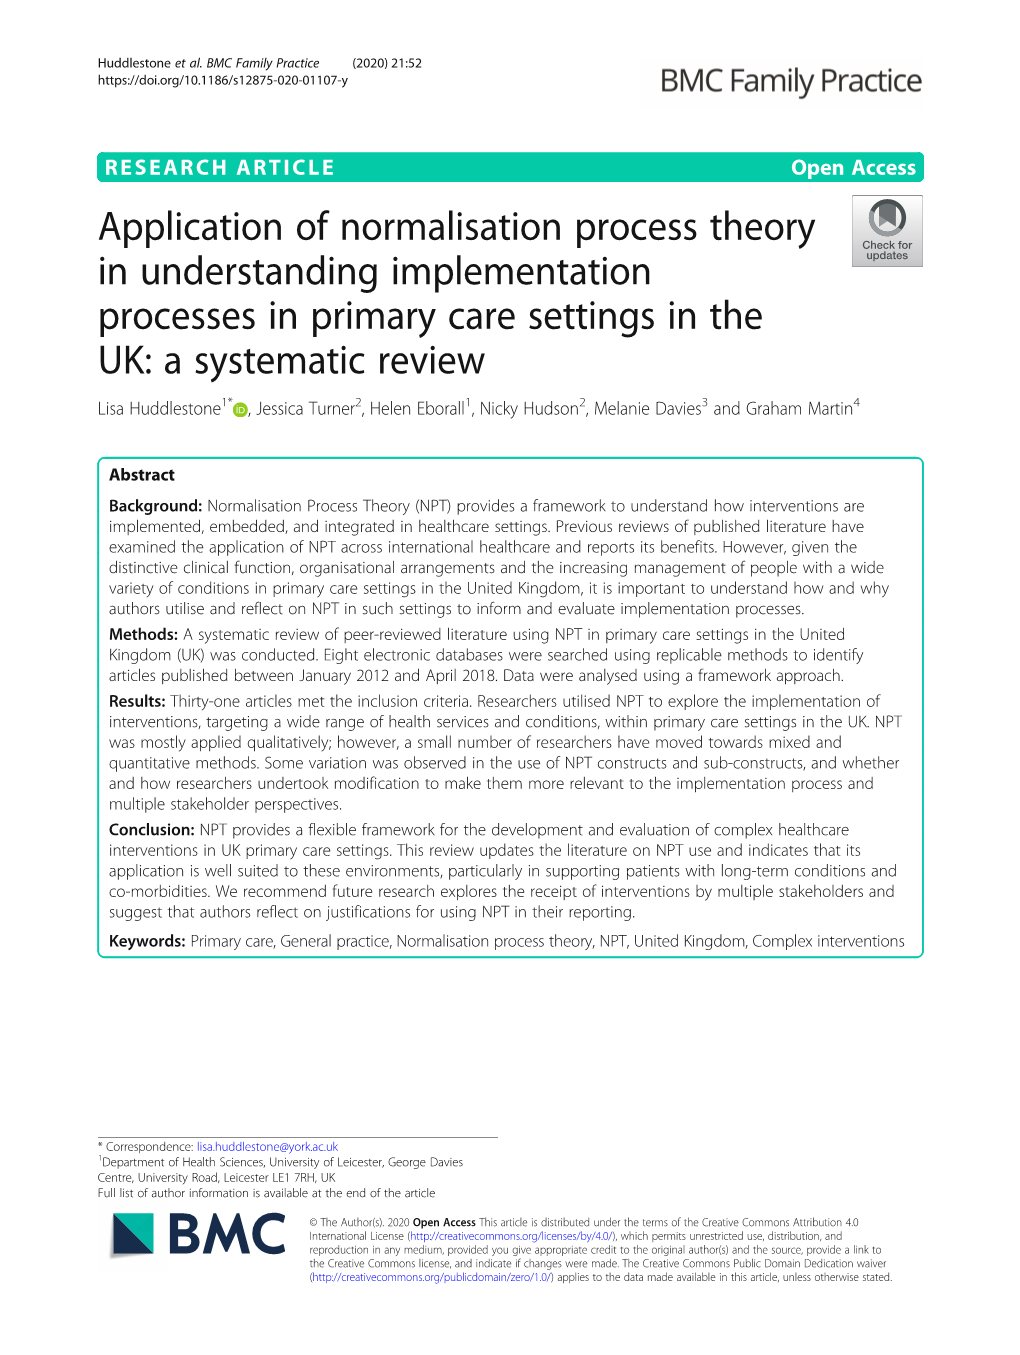 Application of Normalisation Process Theory in Understanding Implementation Processes in Primary Care Settings in the UK